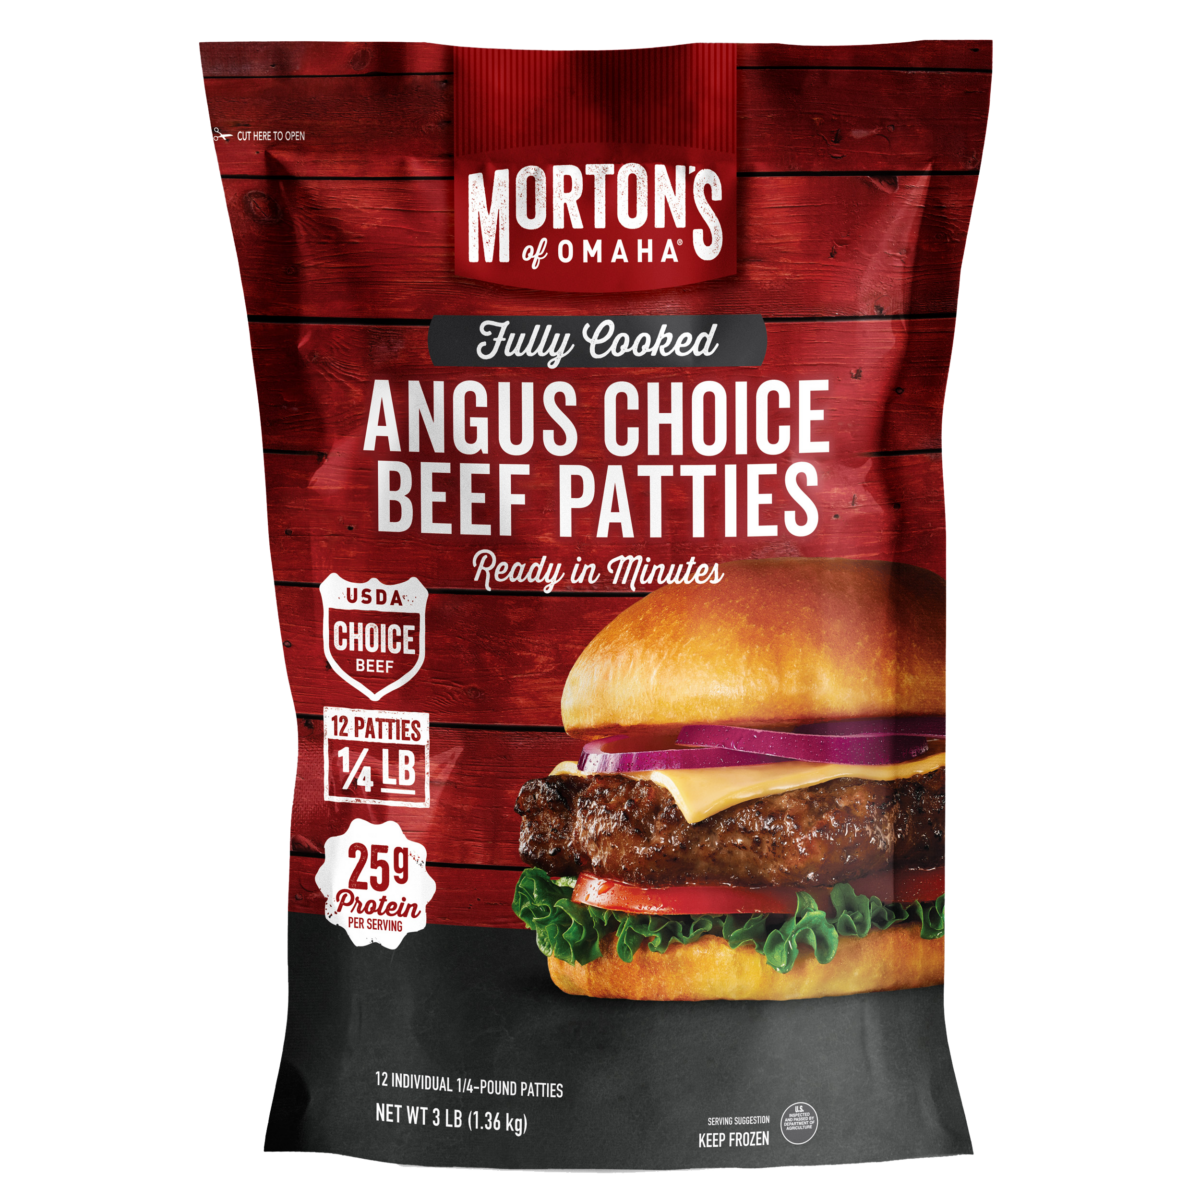 Fully Cooked Angus Choice Beef Patties - Morton's of Omaha